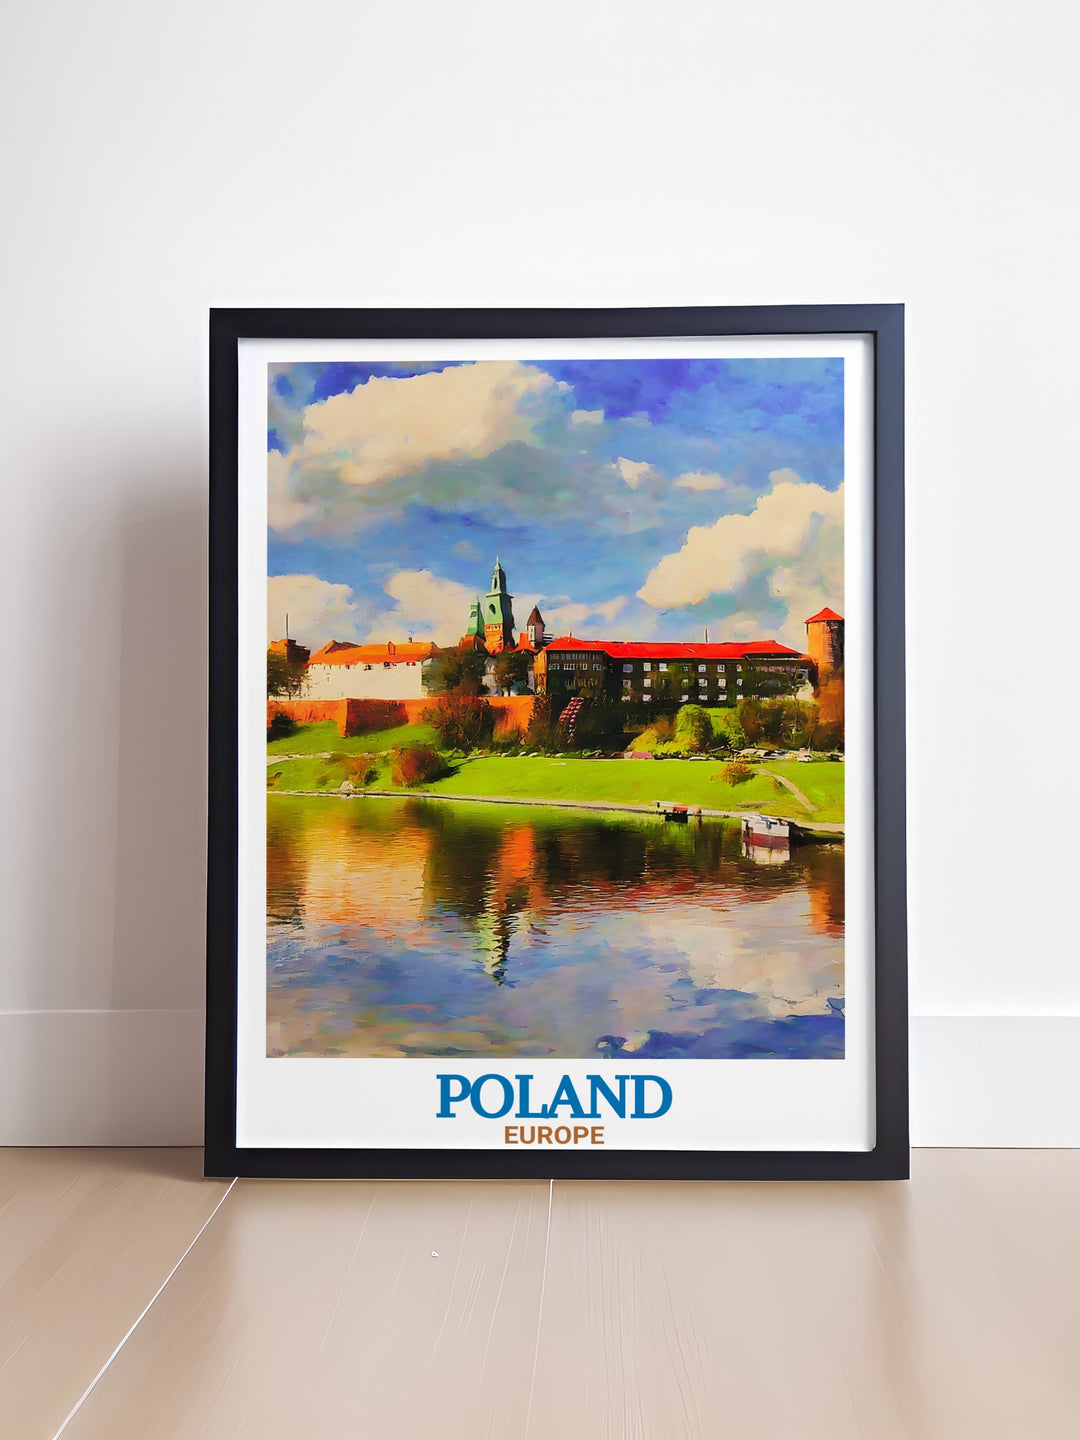 Wawel Castle and Zakopane Poster featuring a vibrant color palette highlighting the historical and cultural significance of these destinations perfect travel poster print for elegant home decor and thoughtful gifts